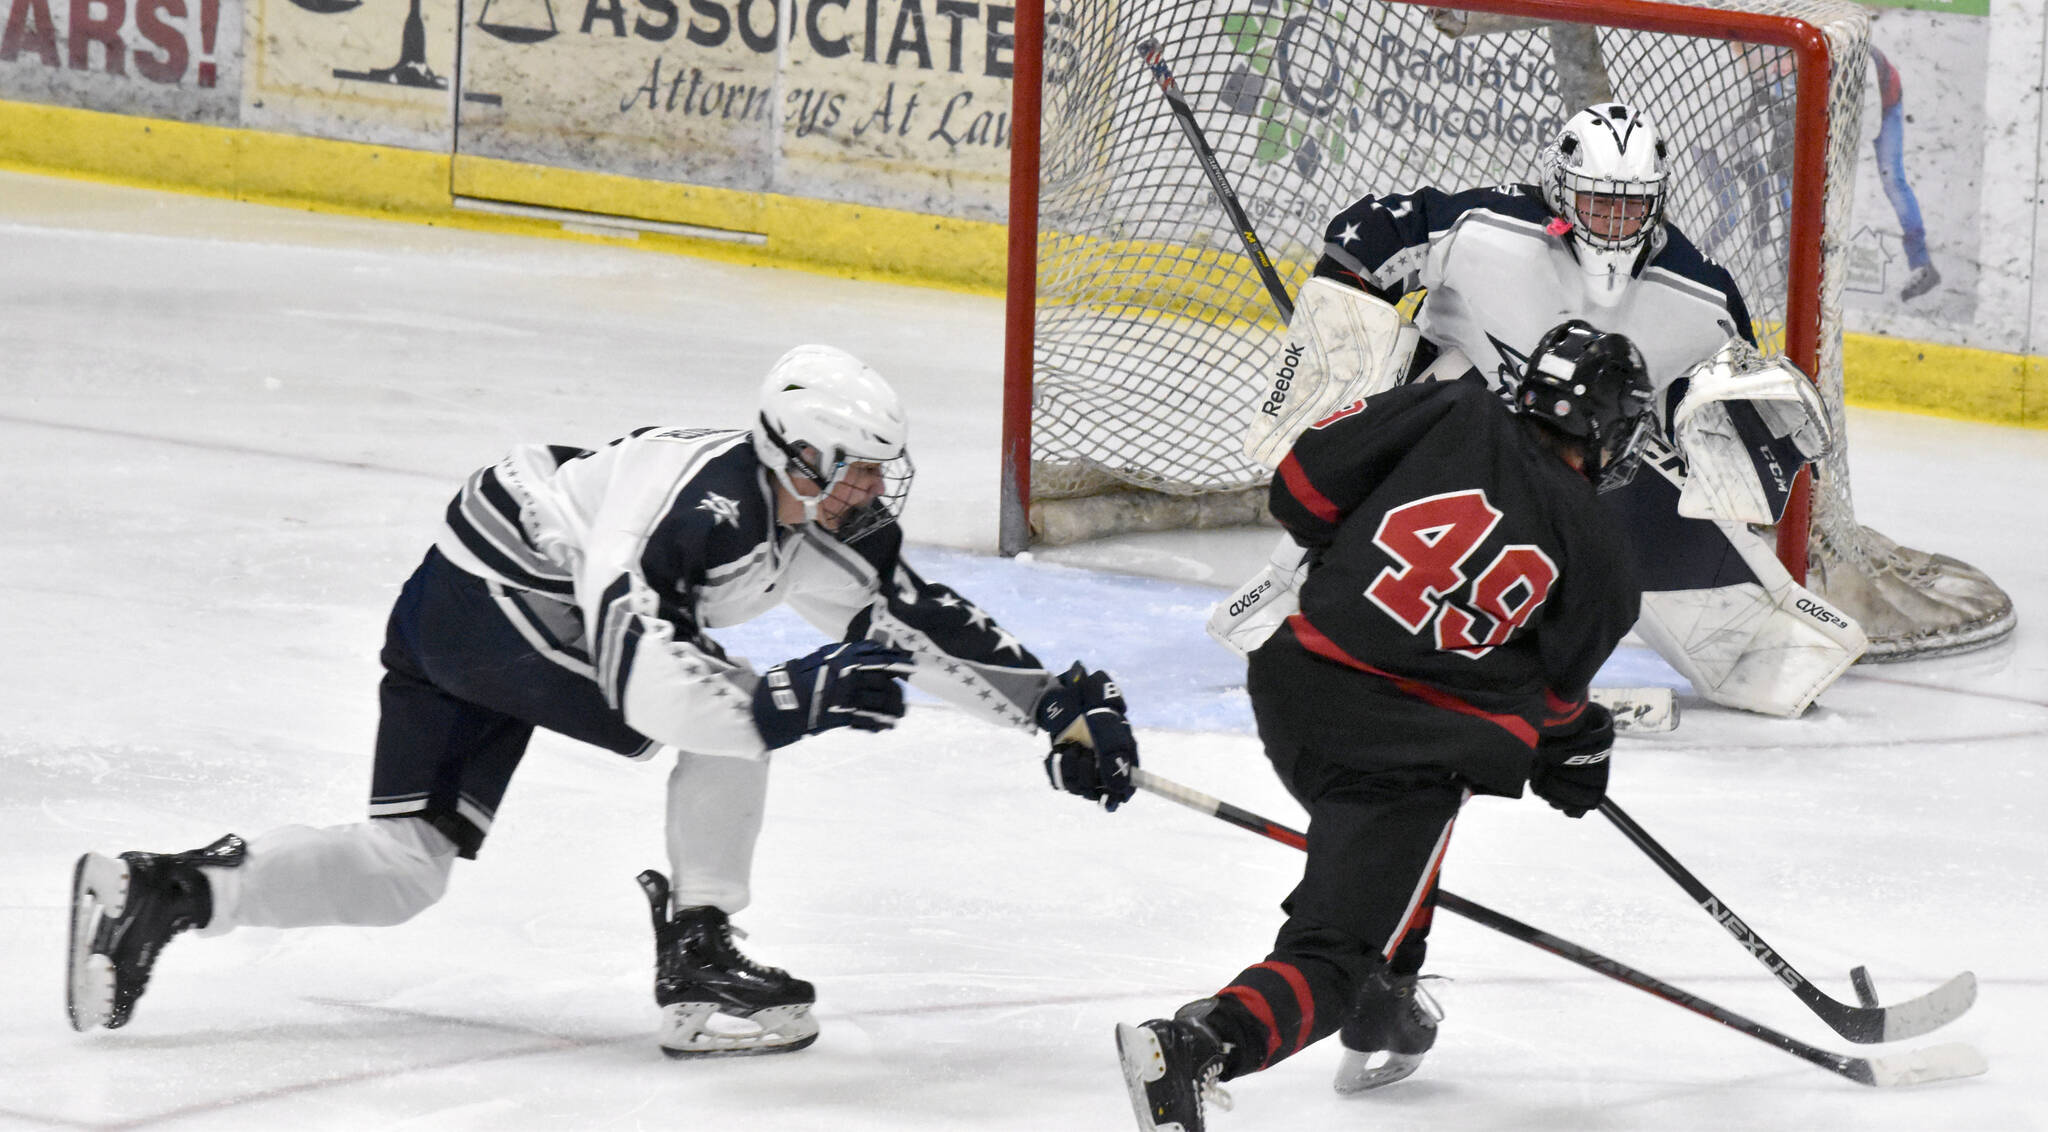 Soldotna defenseman Andrew Arthur and goalie Tanner Clyde work to stop a shot from Juneau-Douglas: Yadaa.at Kale’s Xavier Melancon on Friday, Nov. 17, 2023, at the Soldotna Regional Sports Complex in Soldotna, Alaska. (Photo by Jeff Helminiak/Peninsula Clarion)